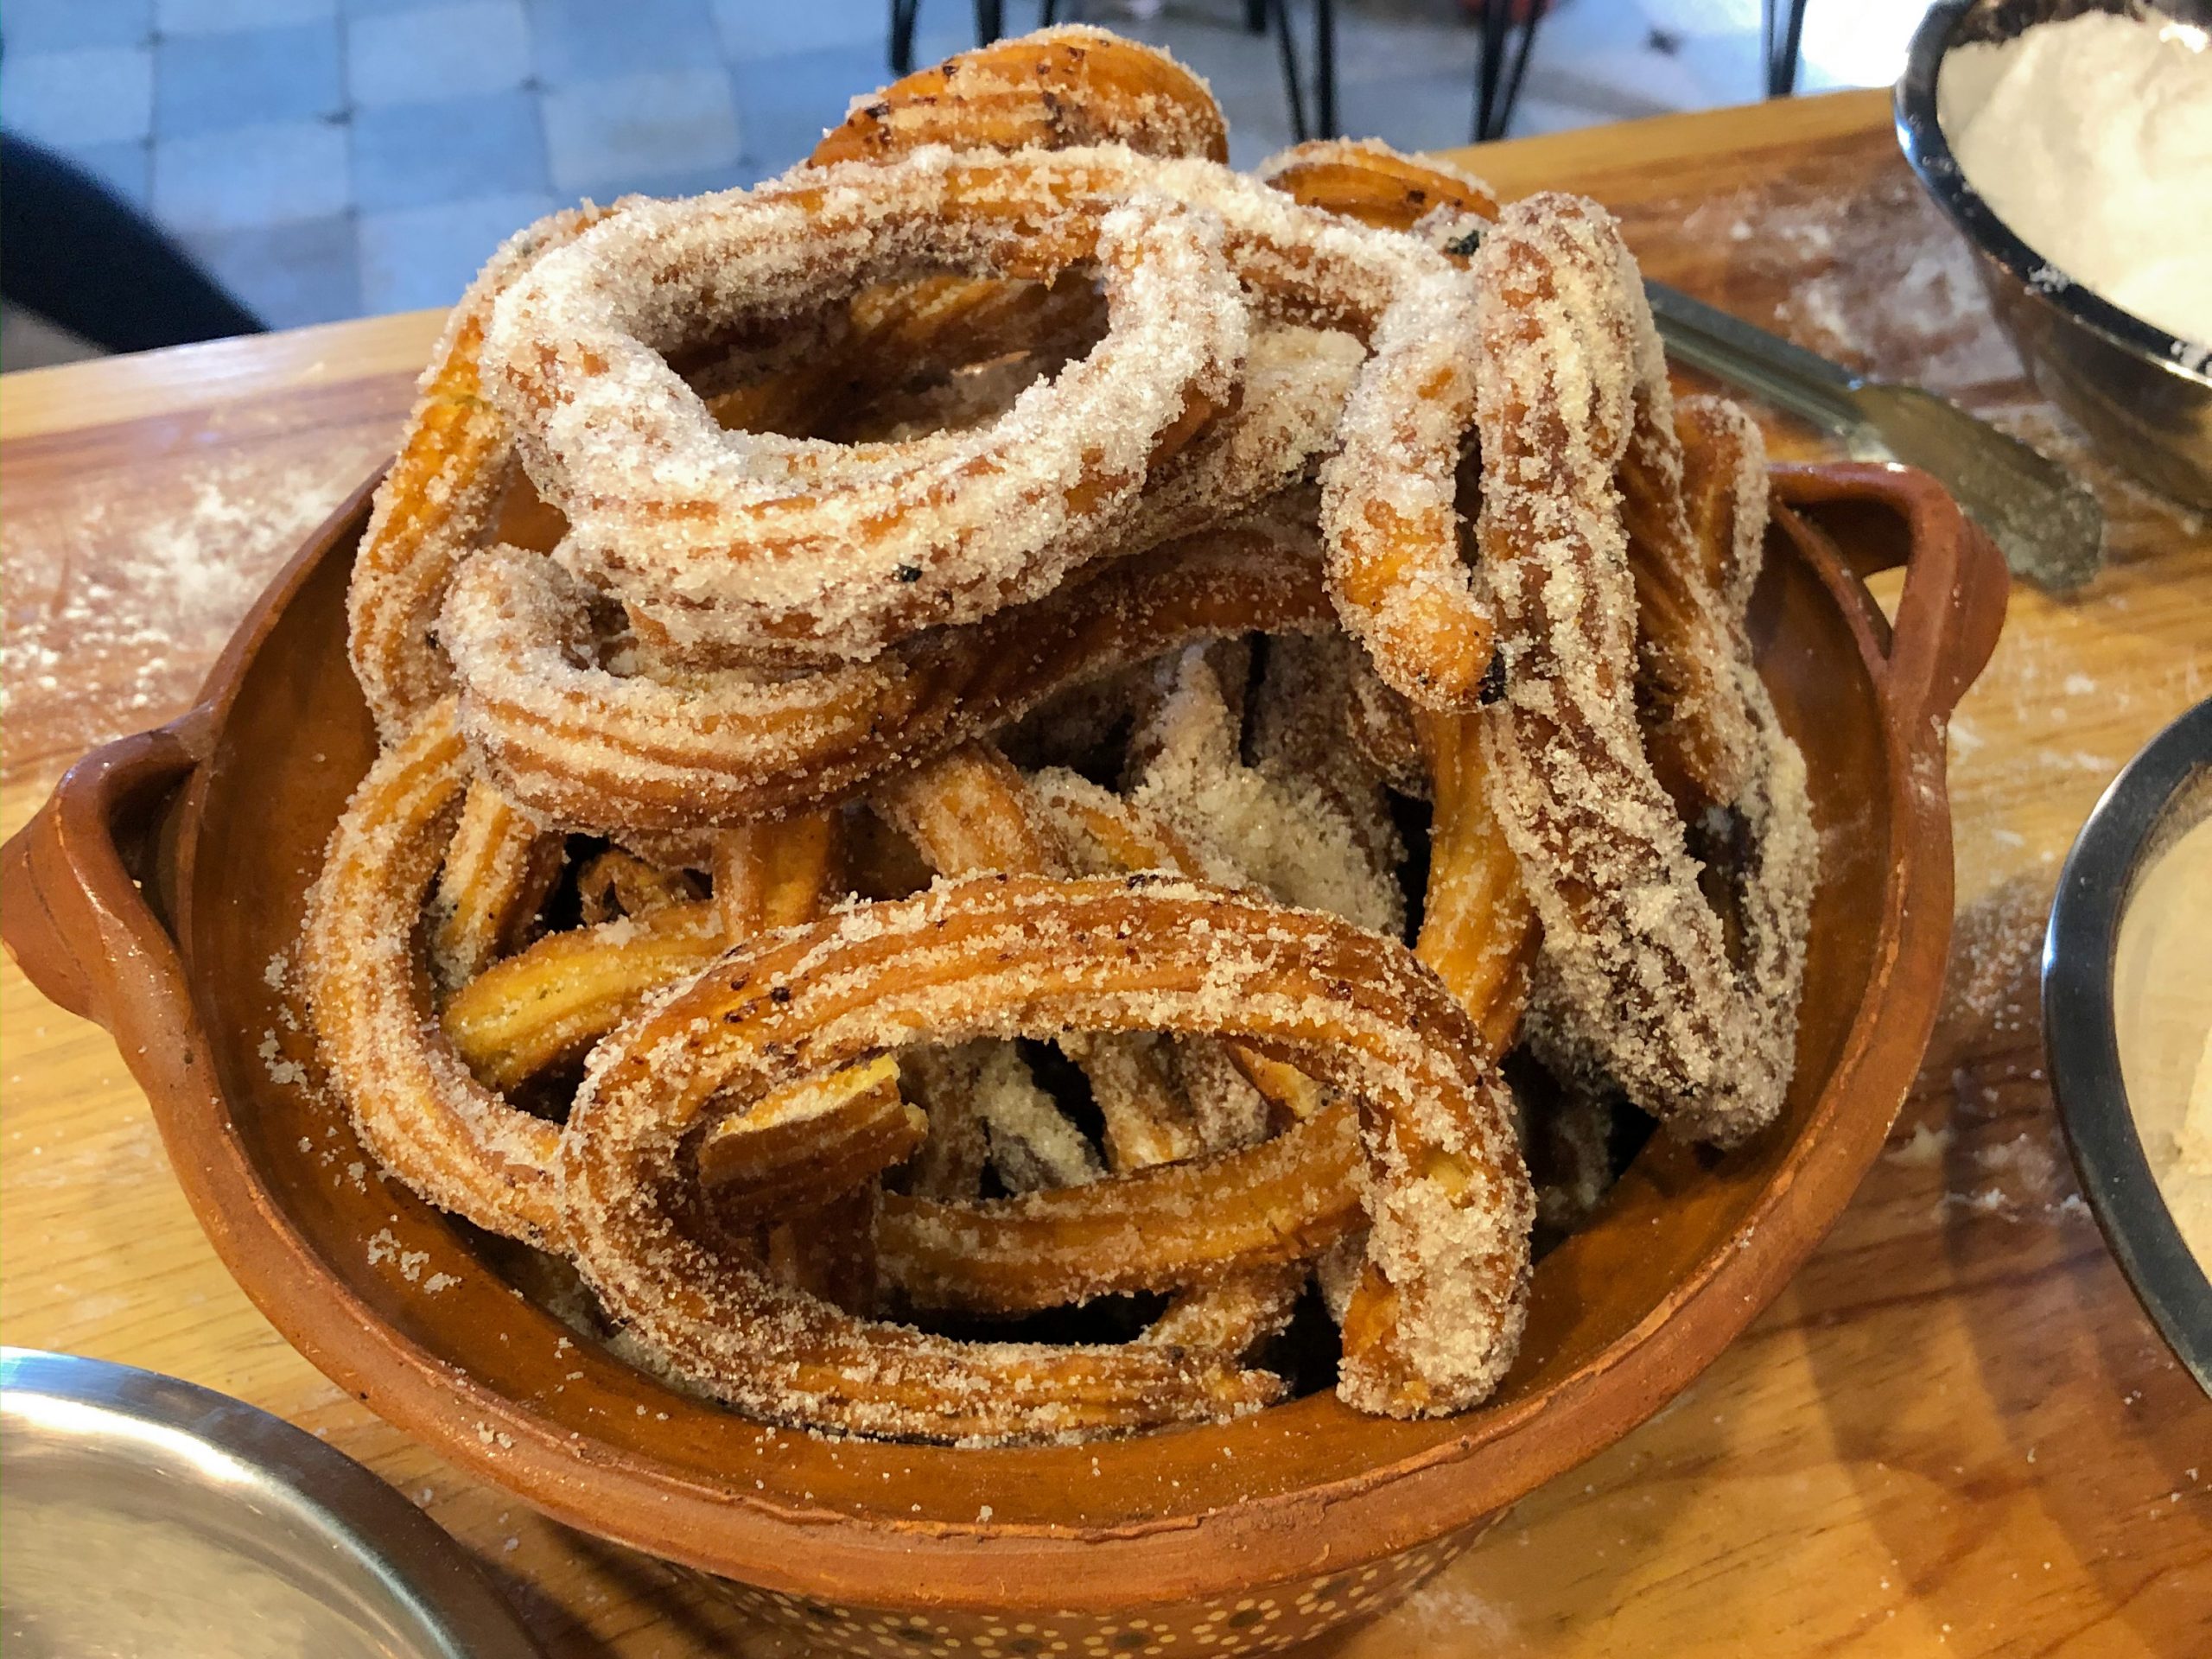 Making Churros in Mexico City